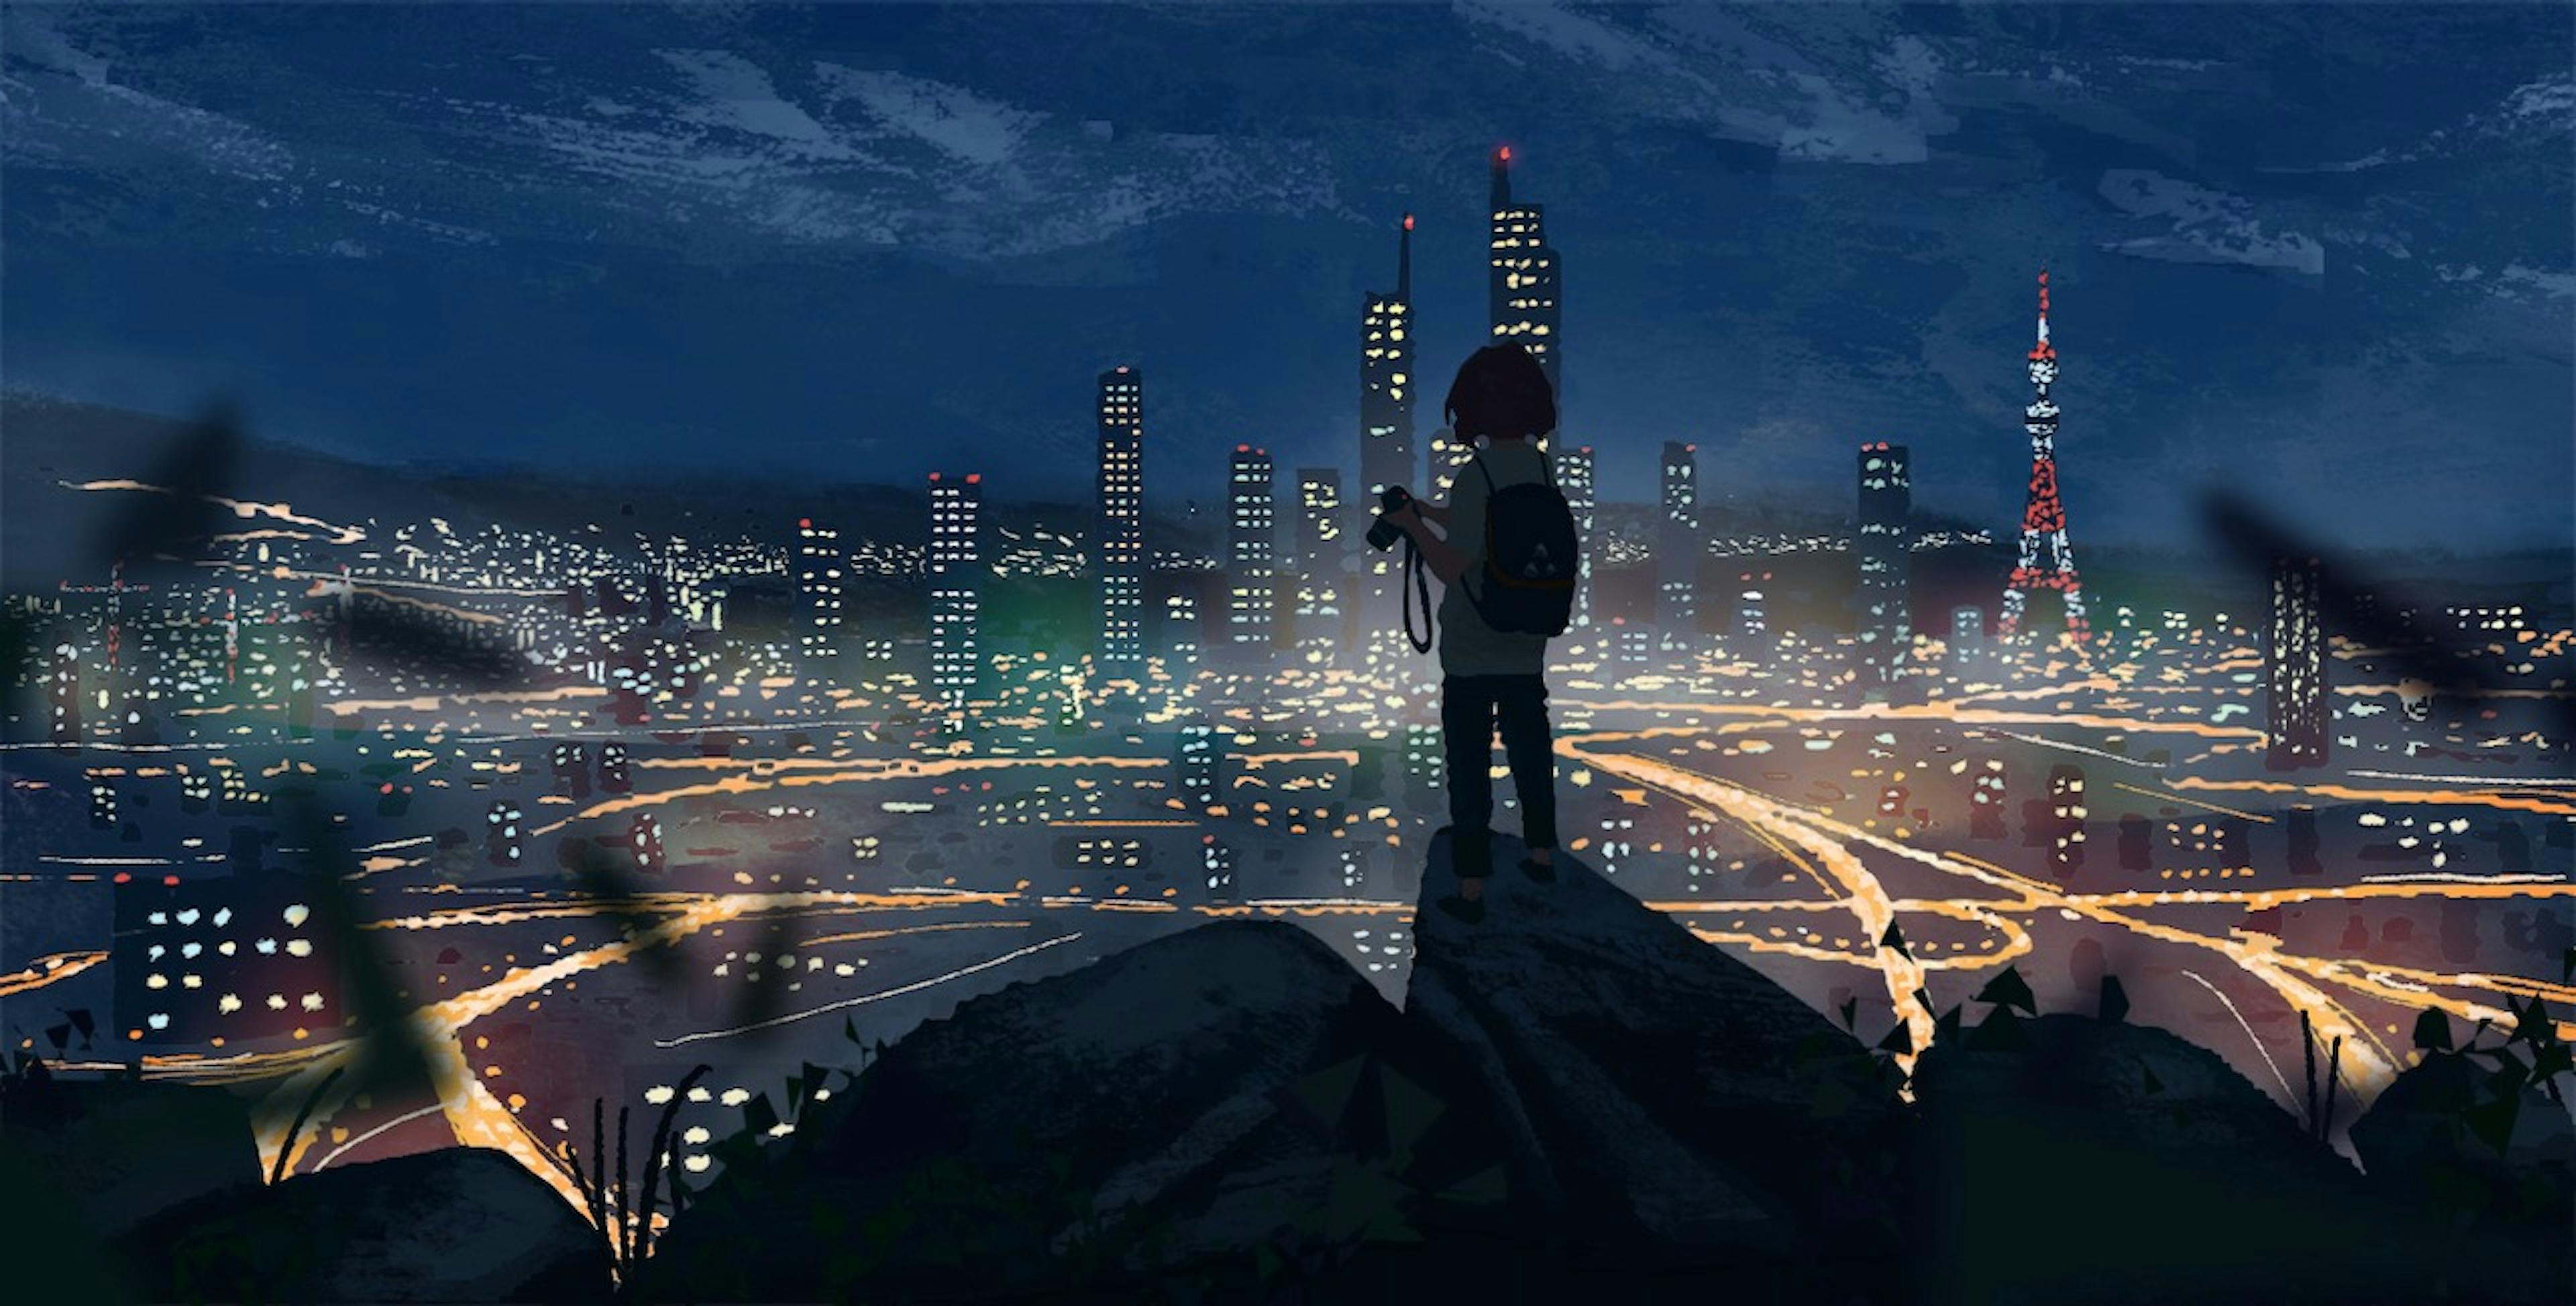 A person looking out over a city